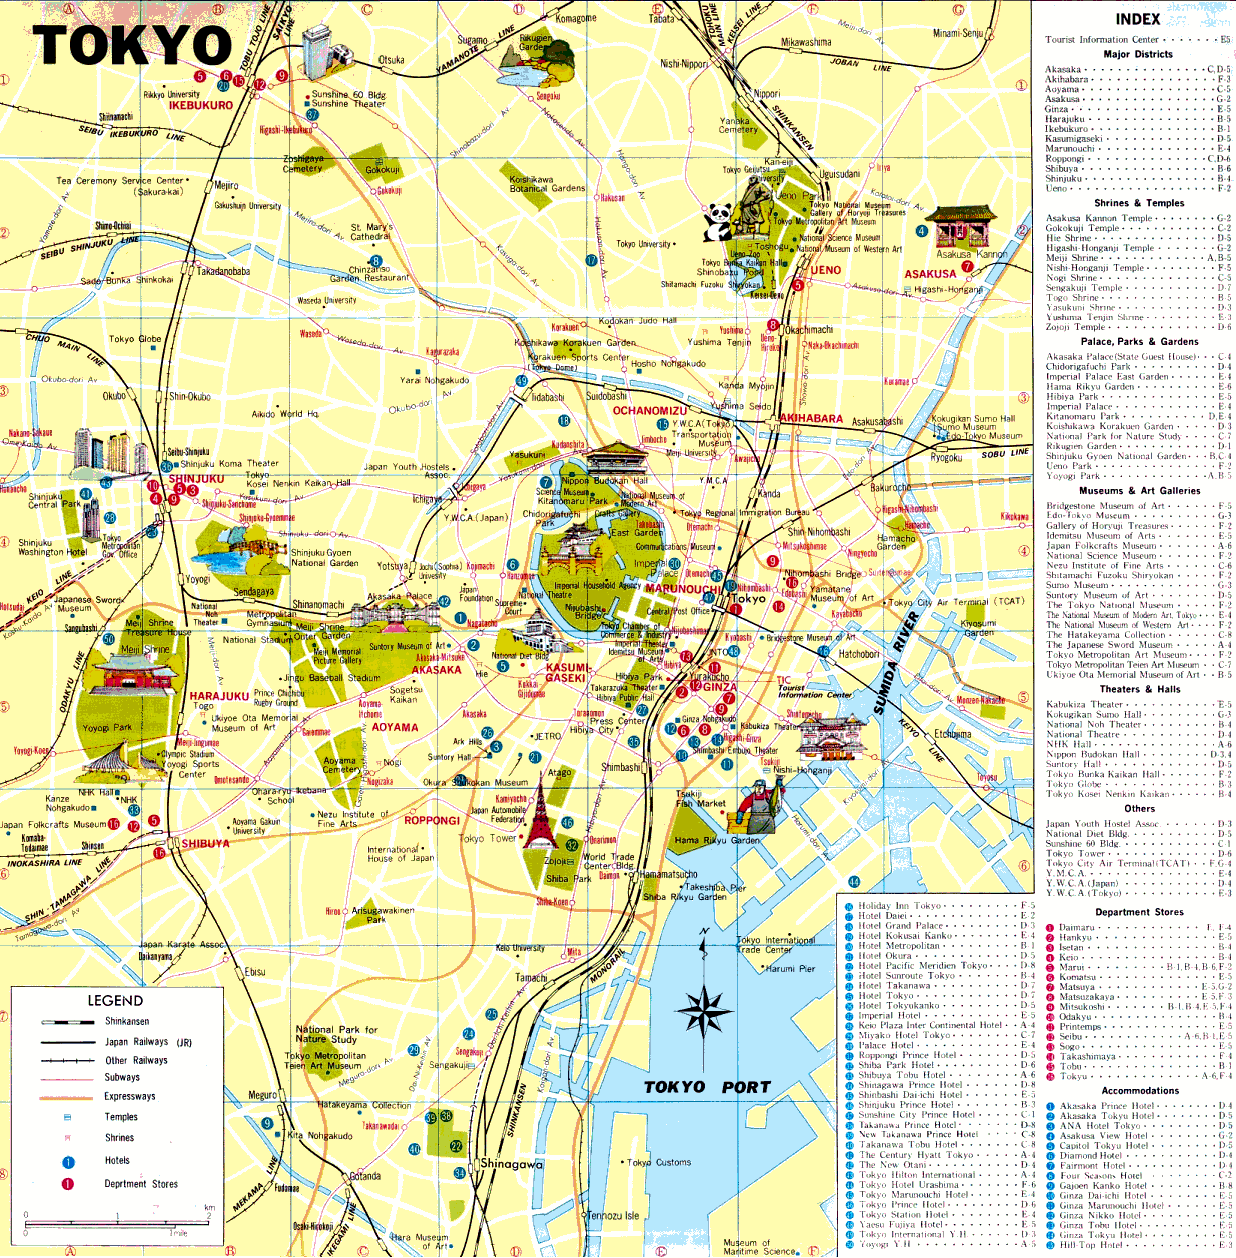 Detail Tokyo City Travel Destinations Attractions Map,Travel Destinations Attractions Map of Tokyo City Japan,Tokyo City Japan Tourism Tourists Travel Guide Hotels Map